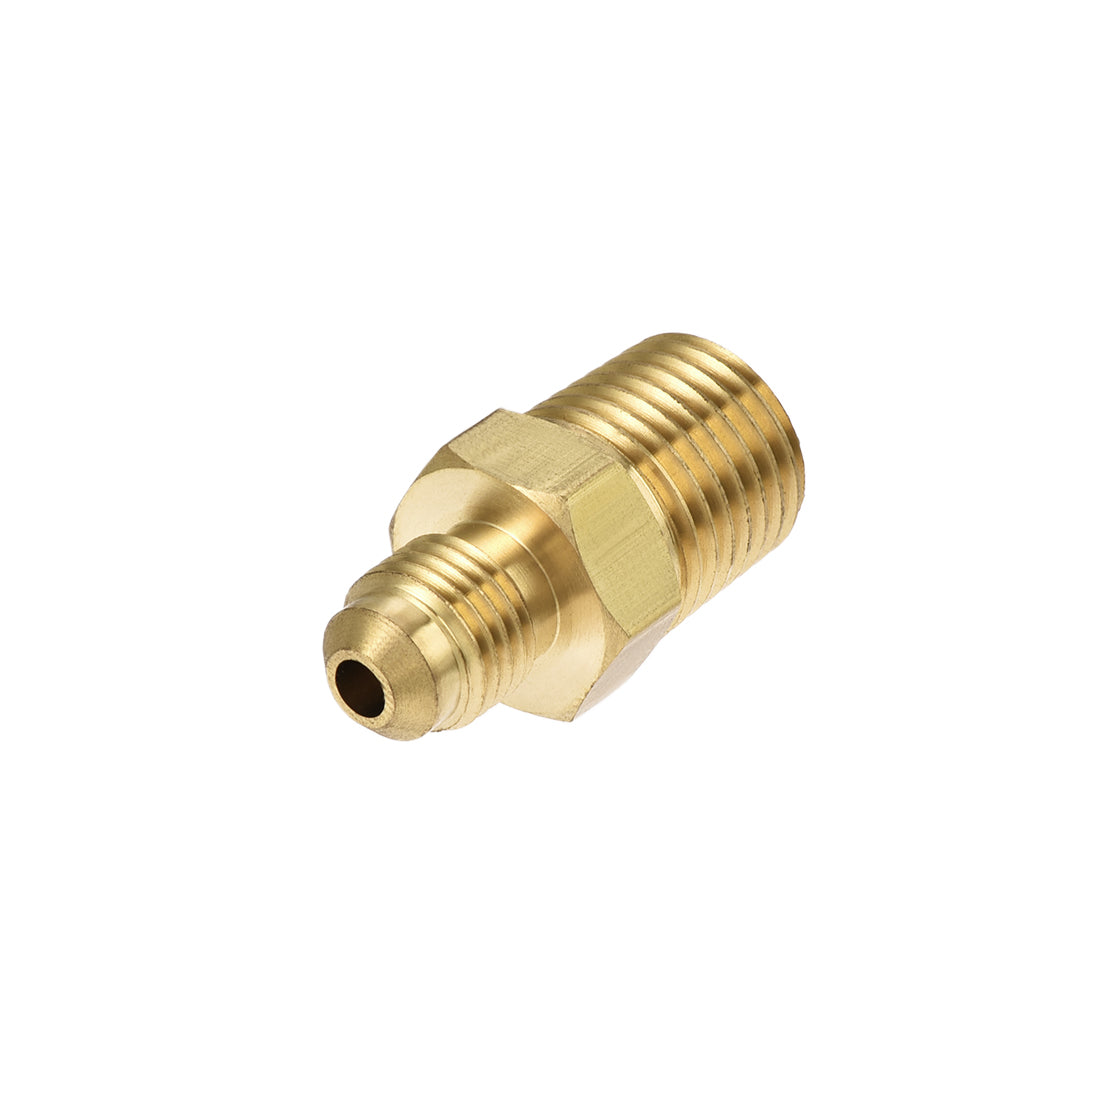 Uxcell Uxcell Brass Pipe Fitting, 3/16 SAE Flare Male to 1/4NPT Male Thread, Tubing Adapter Hose Connector, for Air Conditioner Refrigeration, 2Pcs